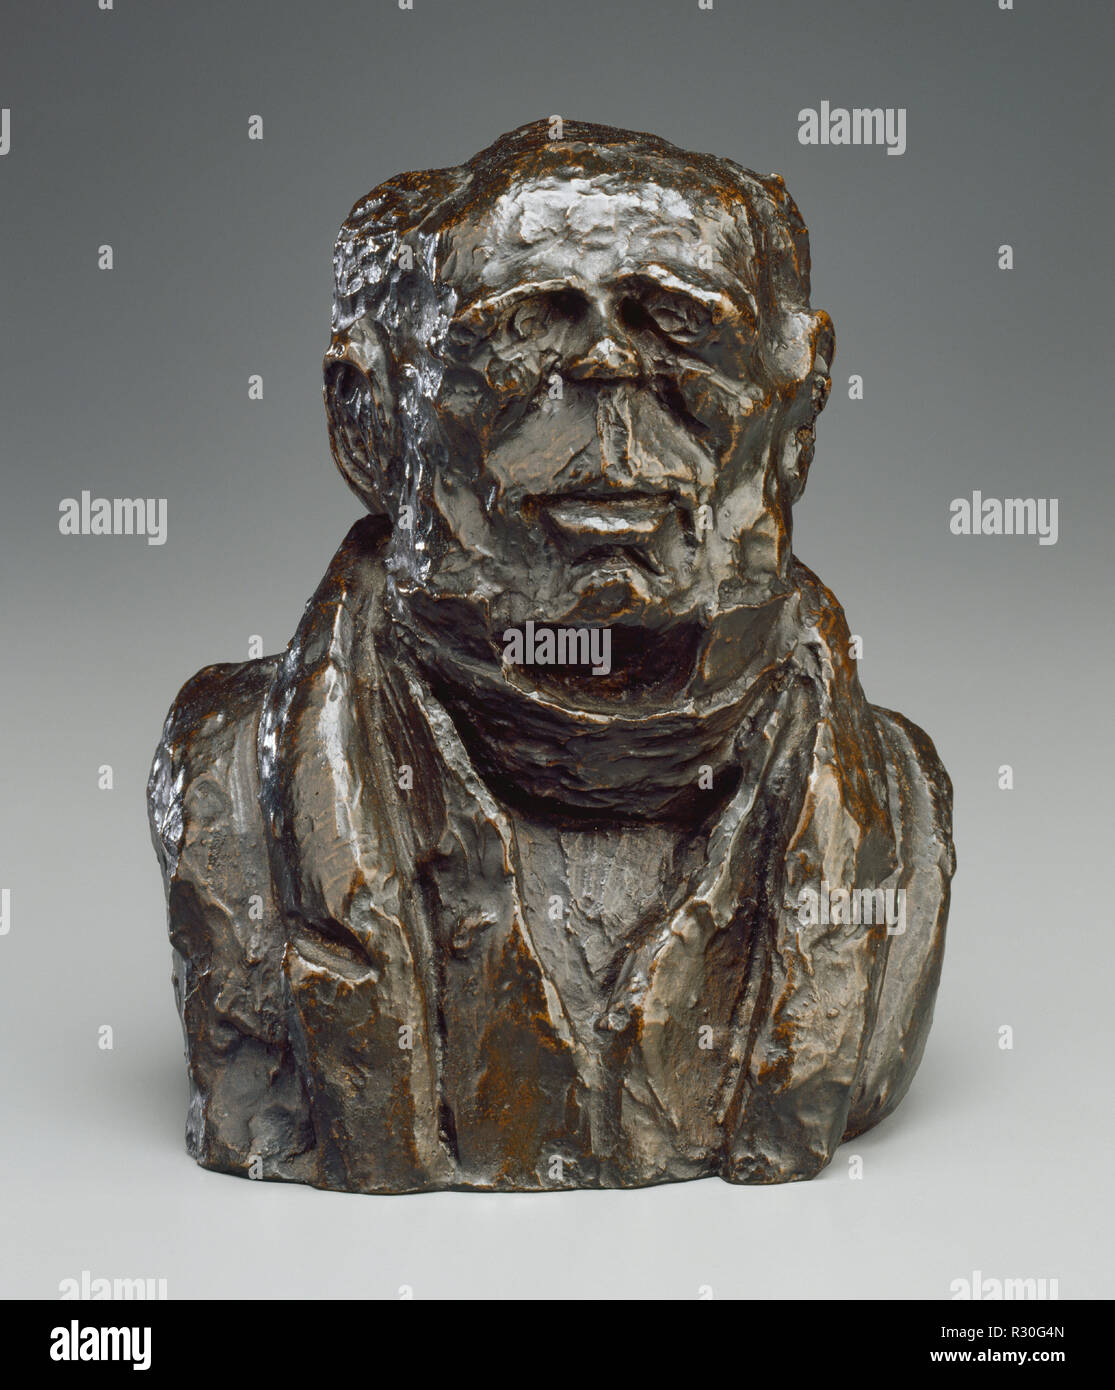 Benjamin Delessert. Dated: model c. 1832/1835, cast 1929/1930. Dimensions: overall: 17.5 x 14.3 x 10.2 cm (6 7/8 x 5 5/8 x 4 in.). Medium: bronze. Museum: National Gallery of Art, Washington DC. Author: HONORÉ DAUMIER. Stock Photo